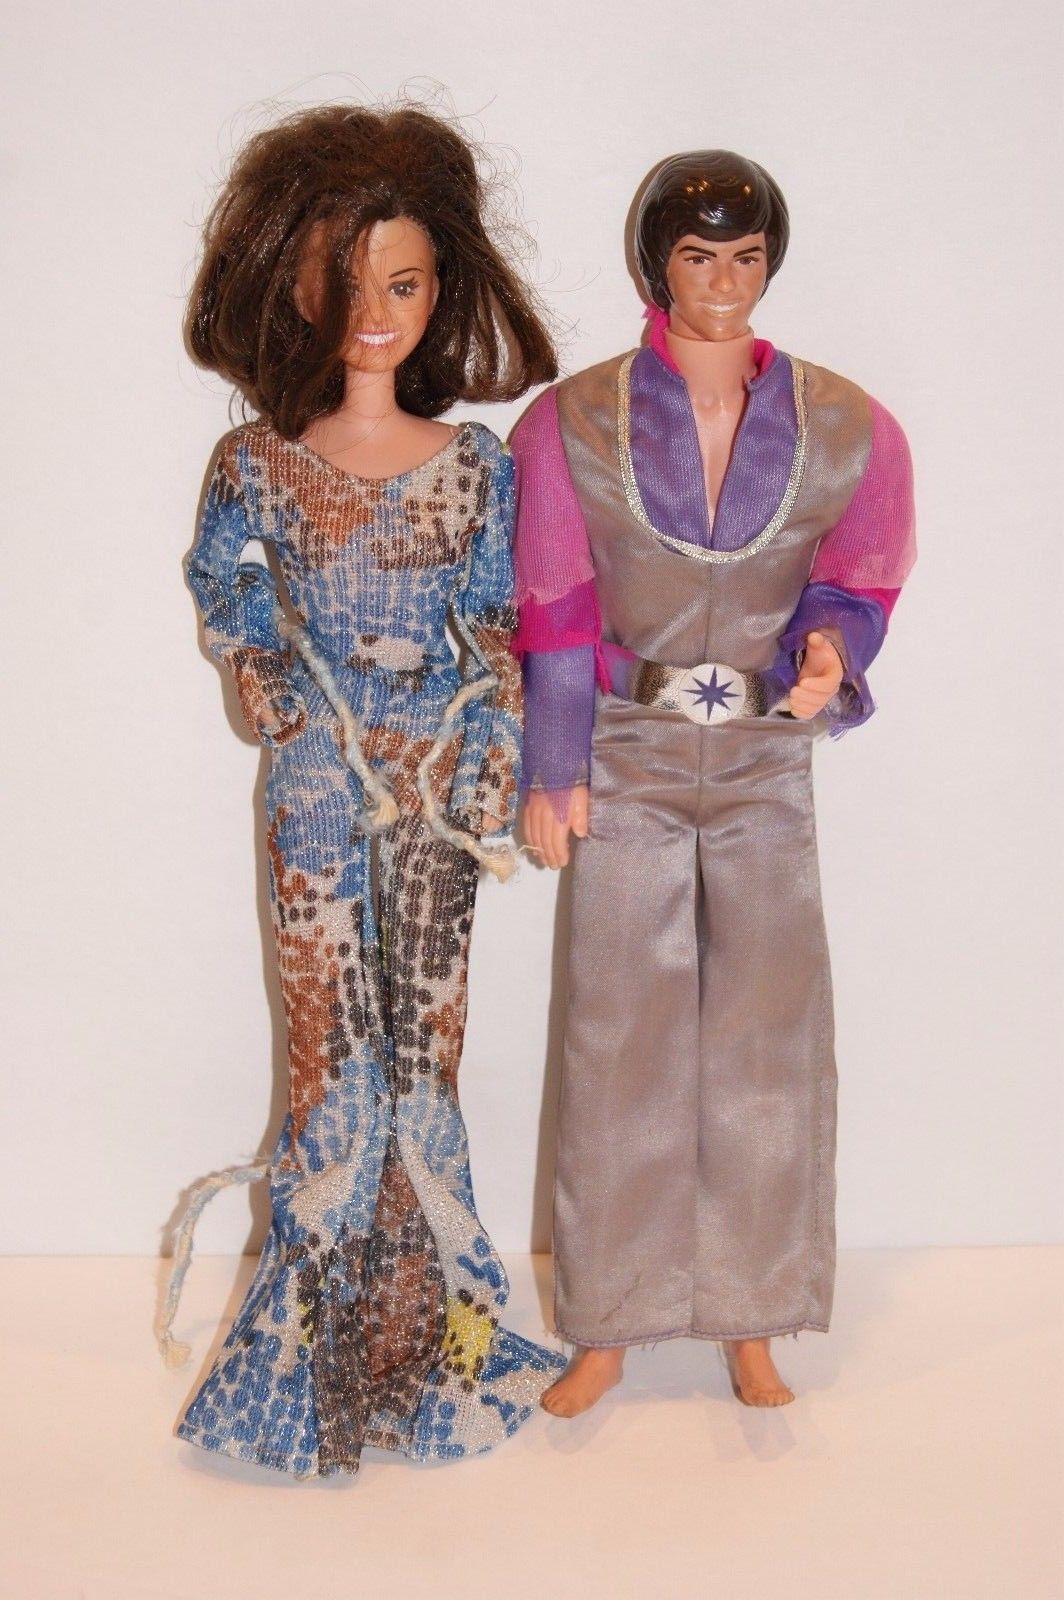 donny and marie barbies